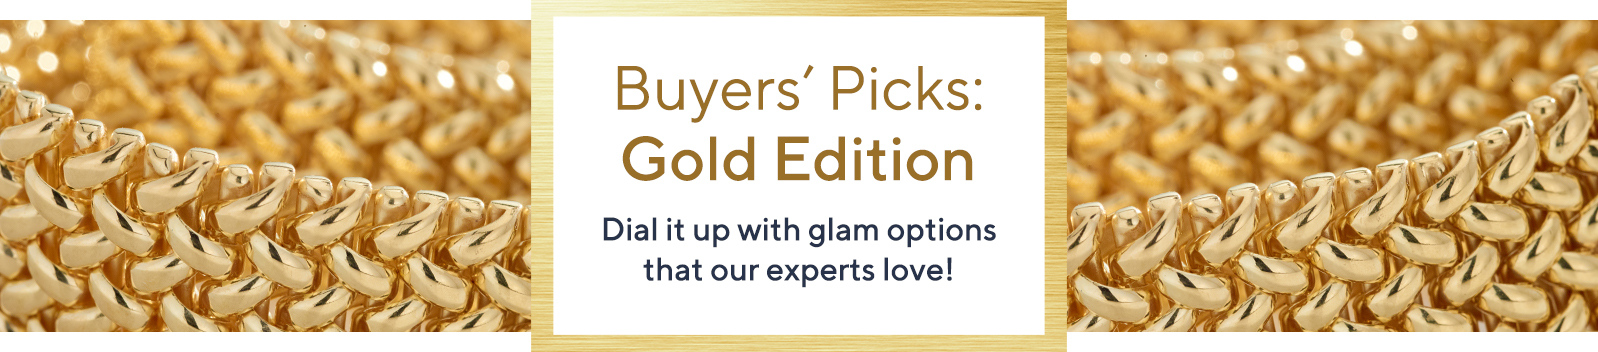 Buyers' Picks: Gold Edition - Dial it up with glam options that our experts love